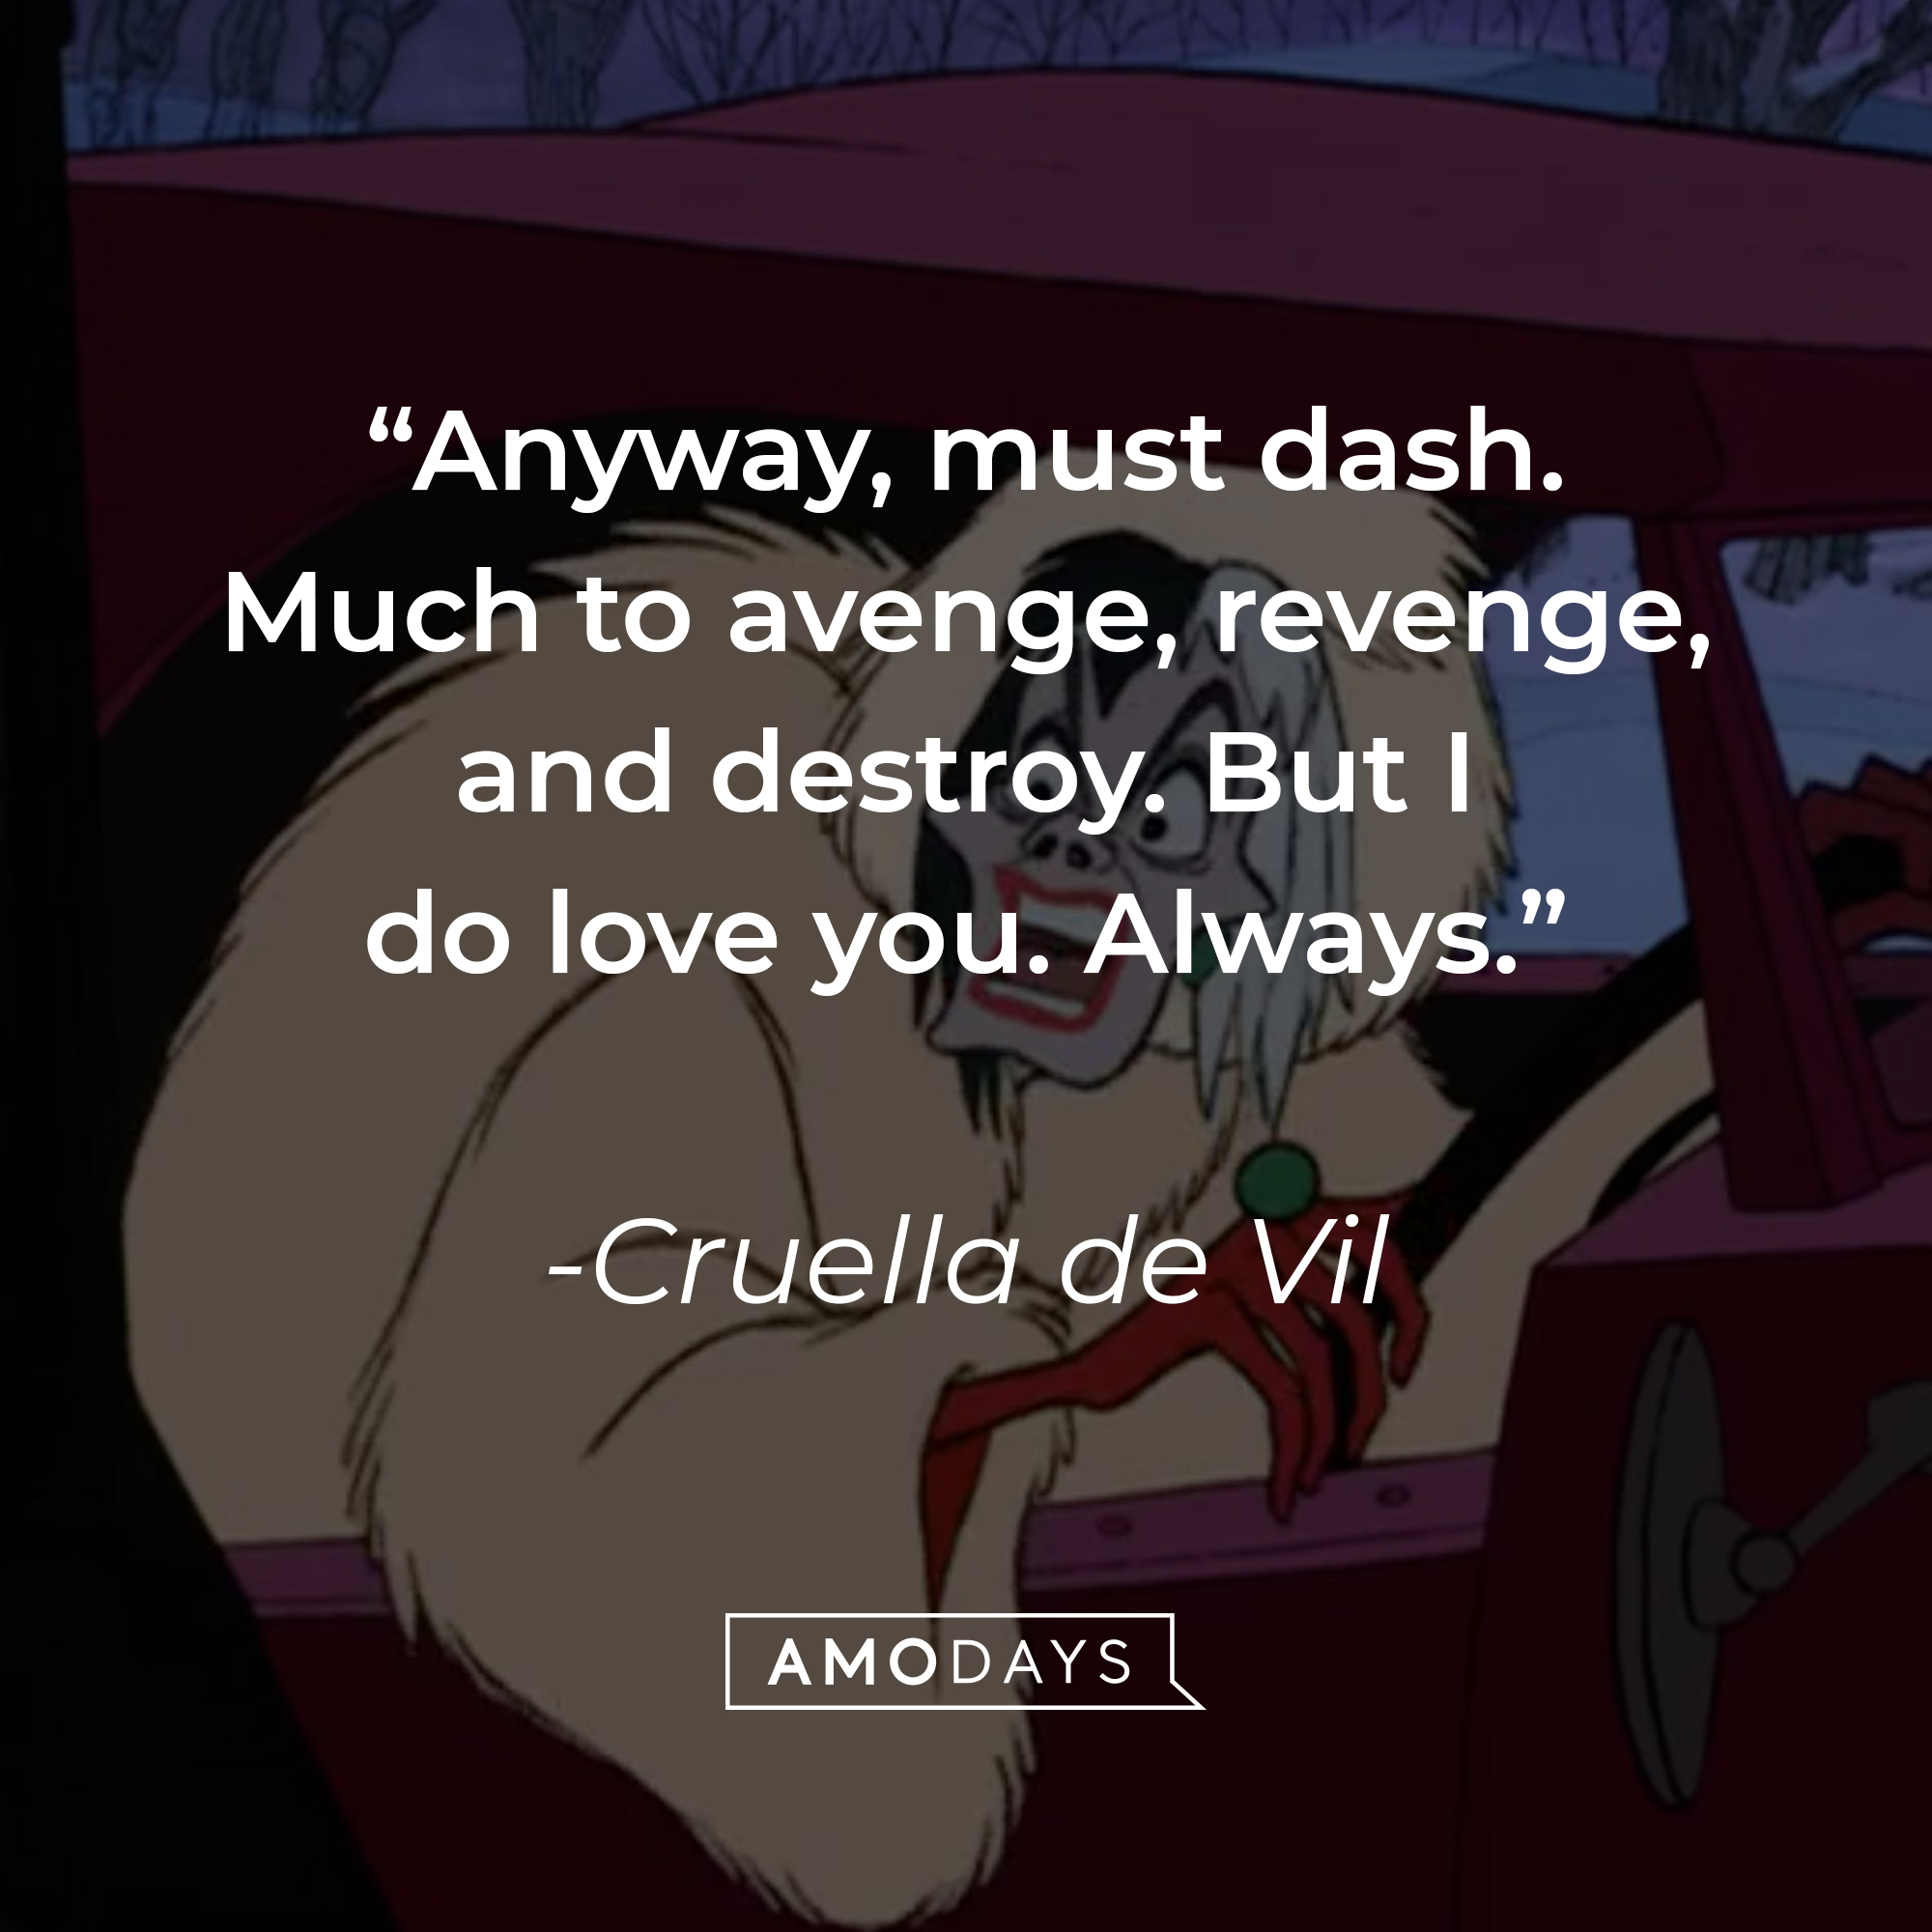 An image of the animated Cruella de Vil, with a quote from the same adapted character in the 2021 film “Cruella”:  “Anyway, must dash. Much to avenge, revenge, and destroy. But I do love you. Always.”  |  Source: Facebook.com/DisneyCruellaDeVil